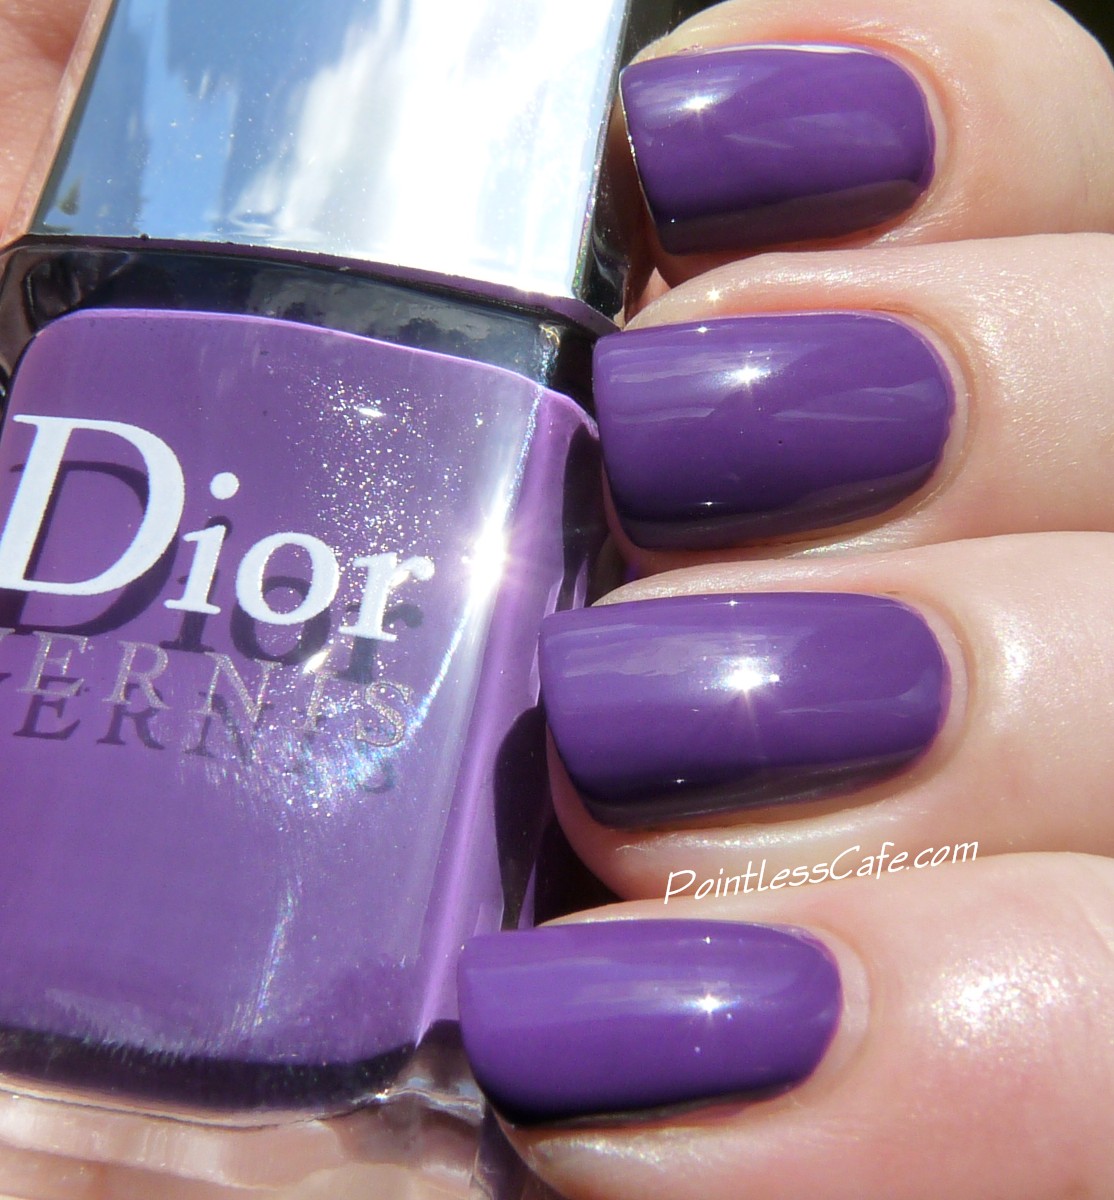 Nail of the Day Dior Ultra Violet 687 Pointless Cafe